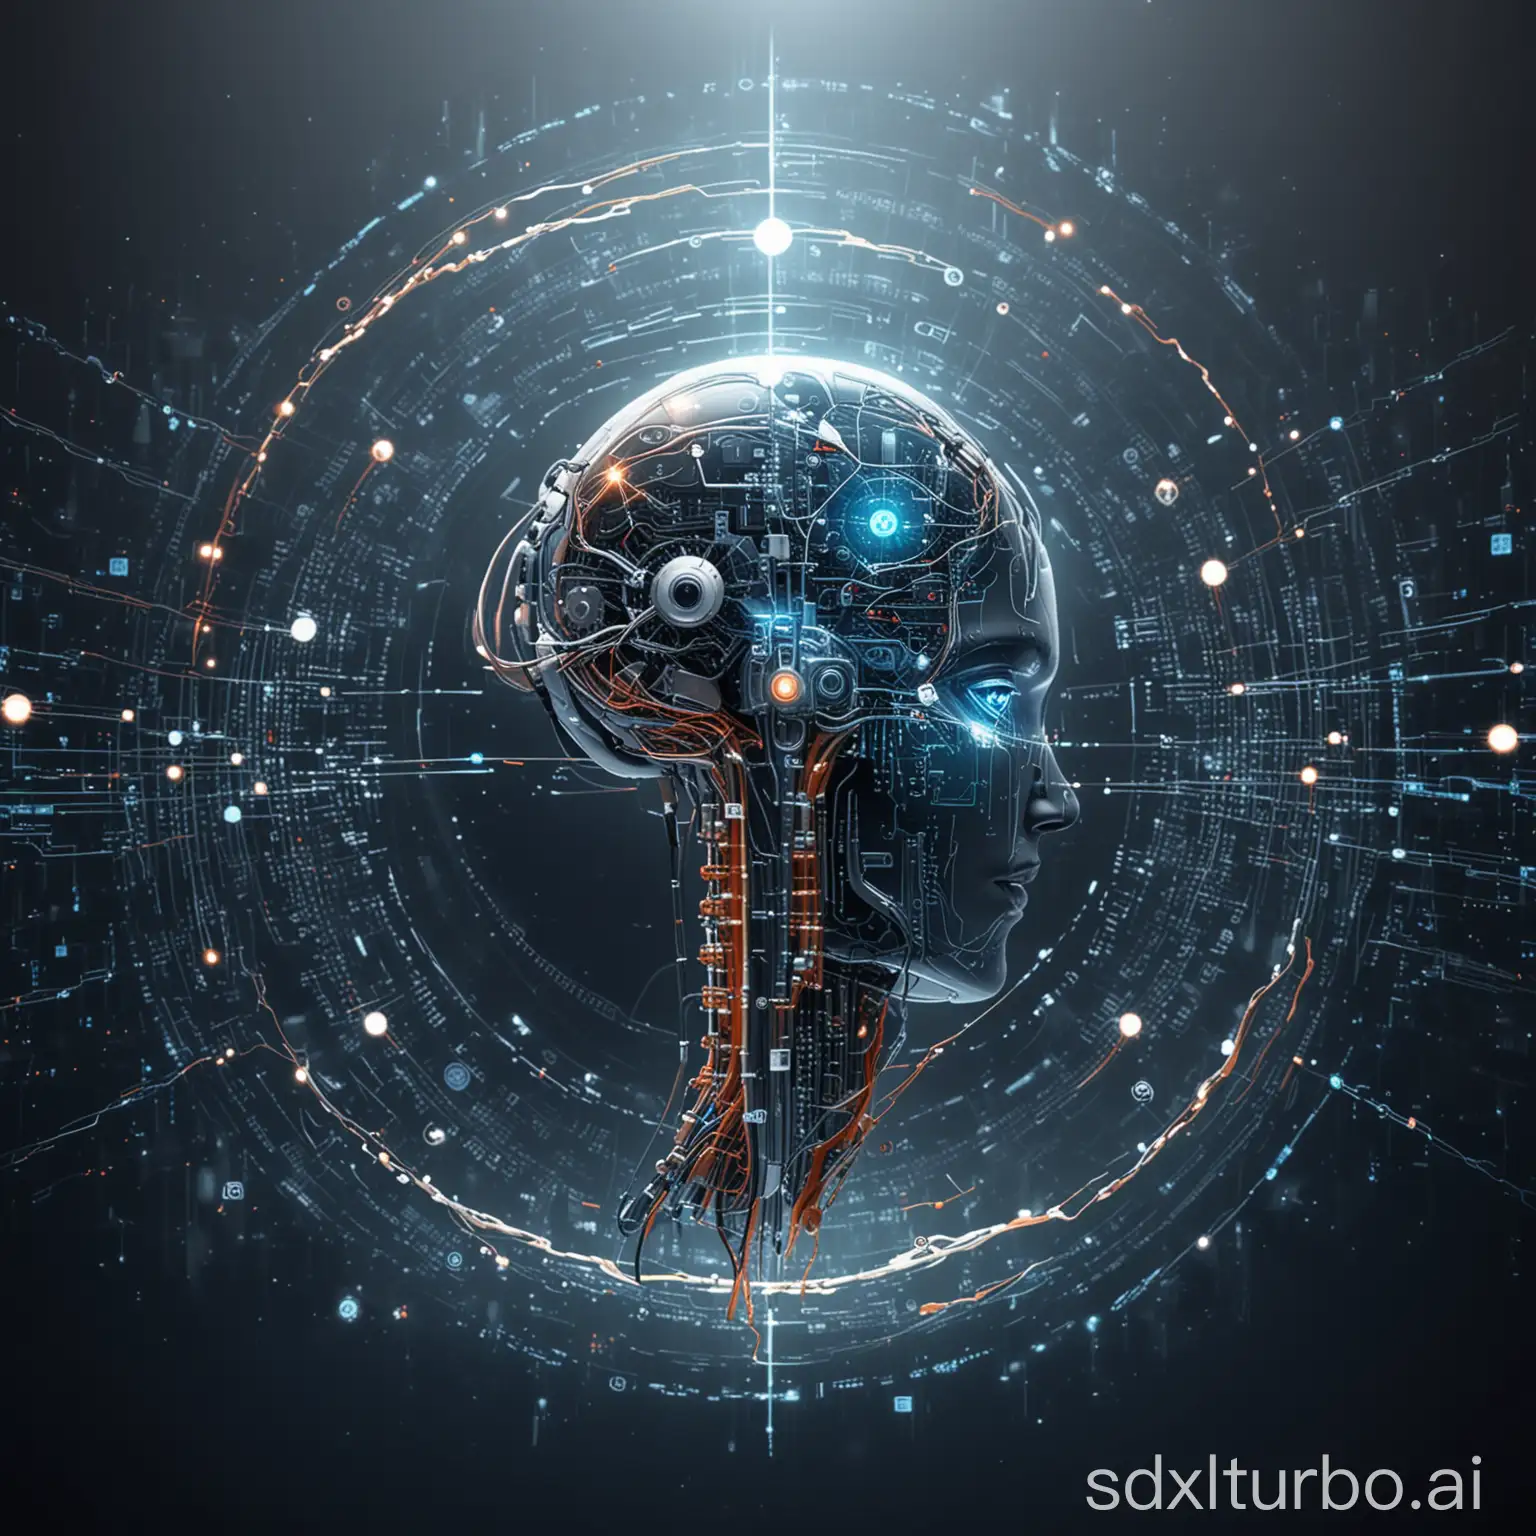 background of a world with technological advancement focusing on Artificial Intelligence